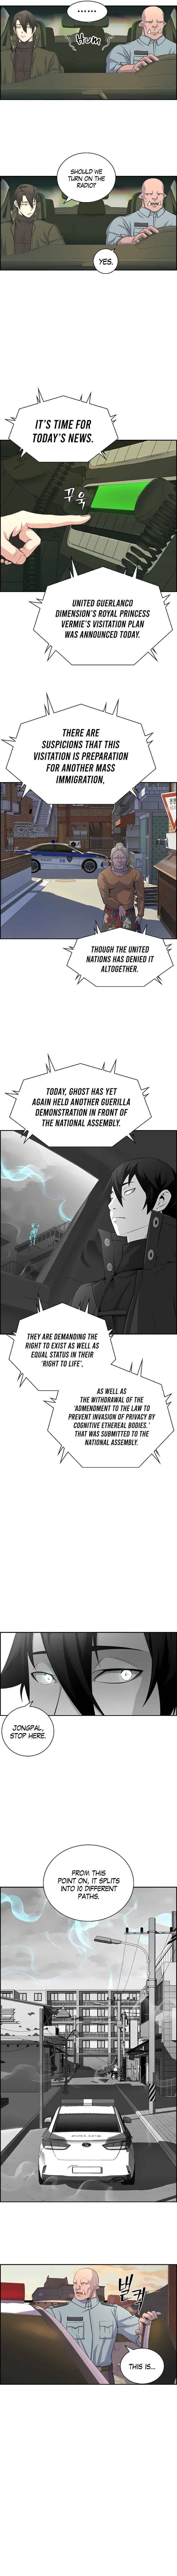 Foreigner on the Periphery Chapter 4 page 10 - MangaWeebs.in